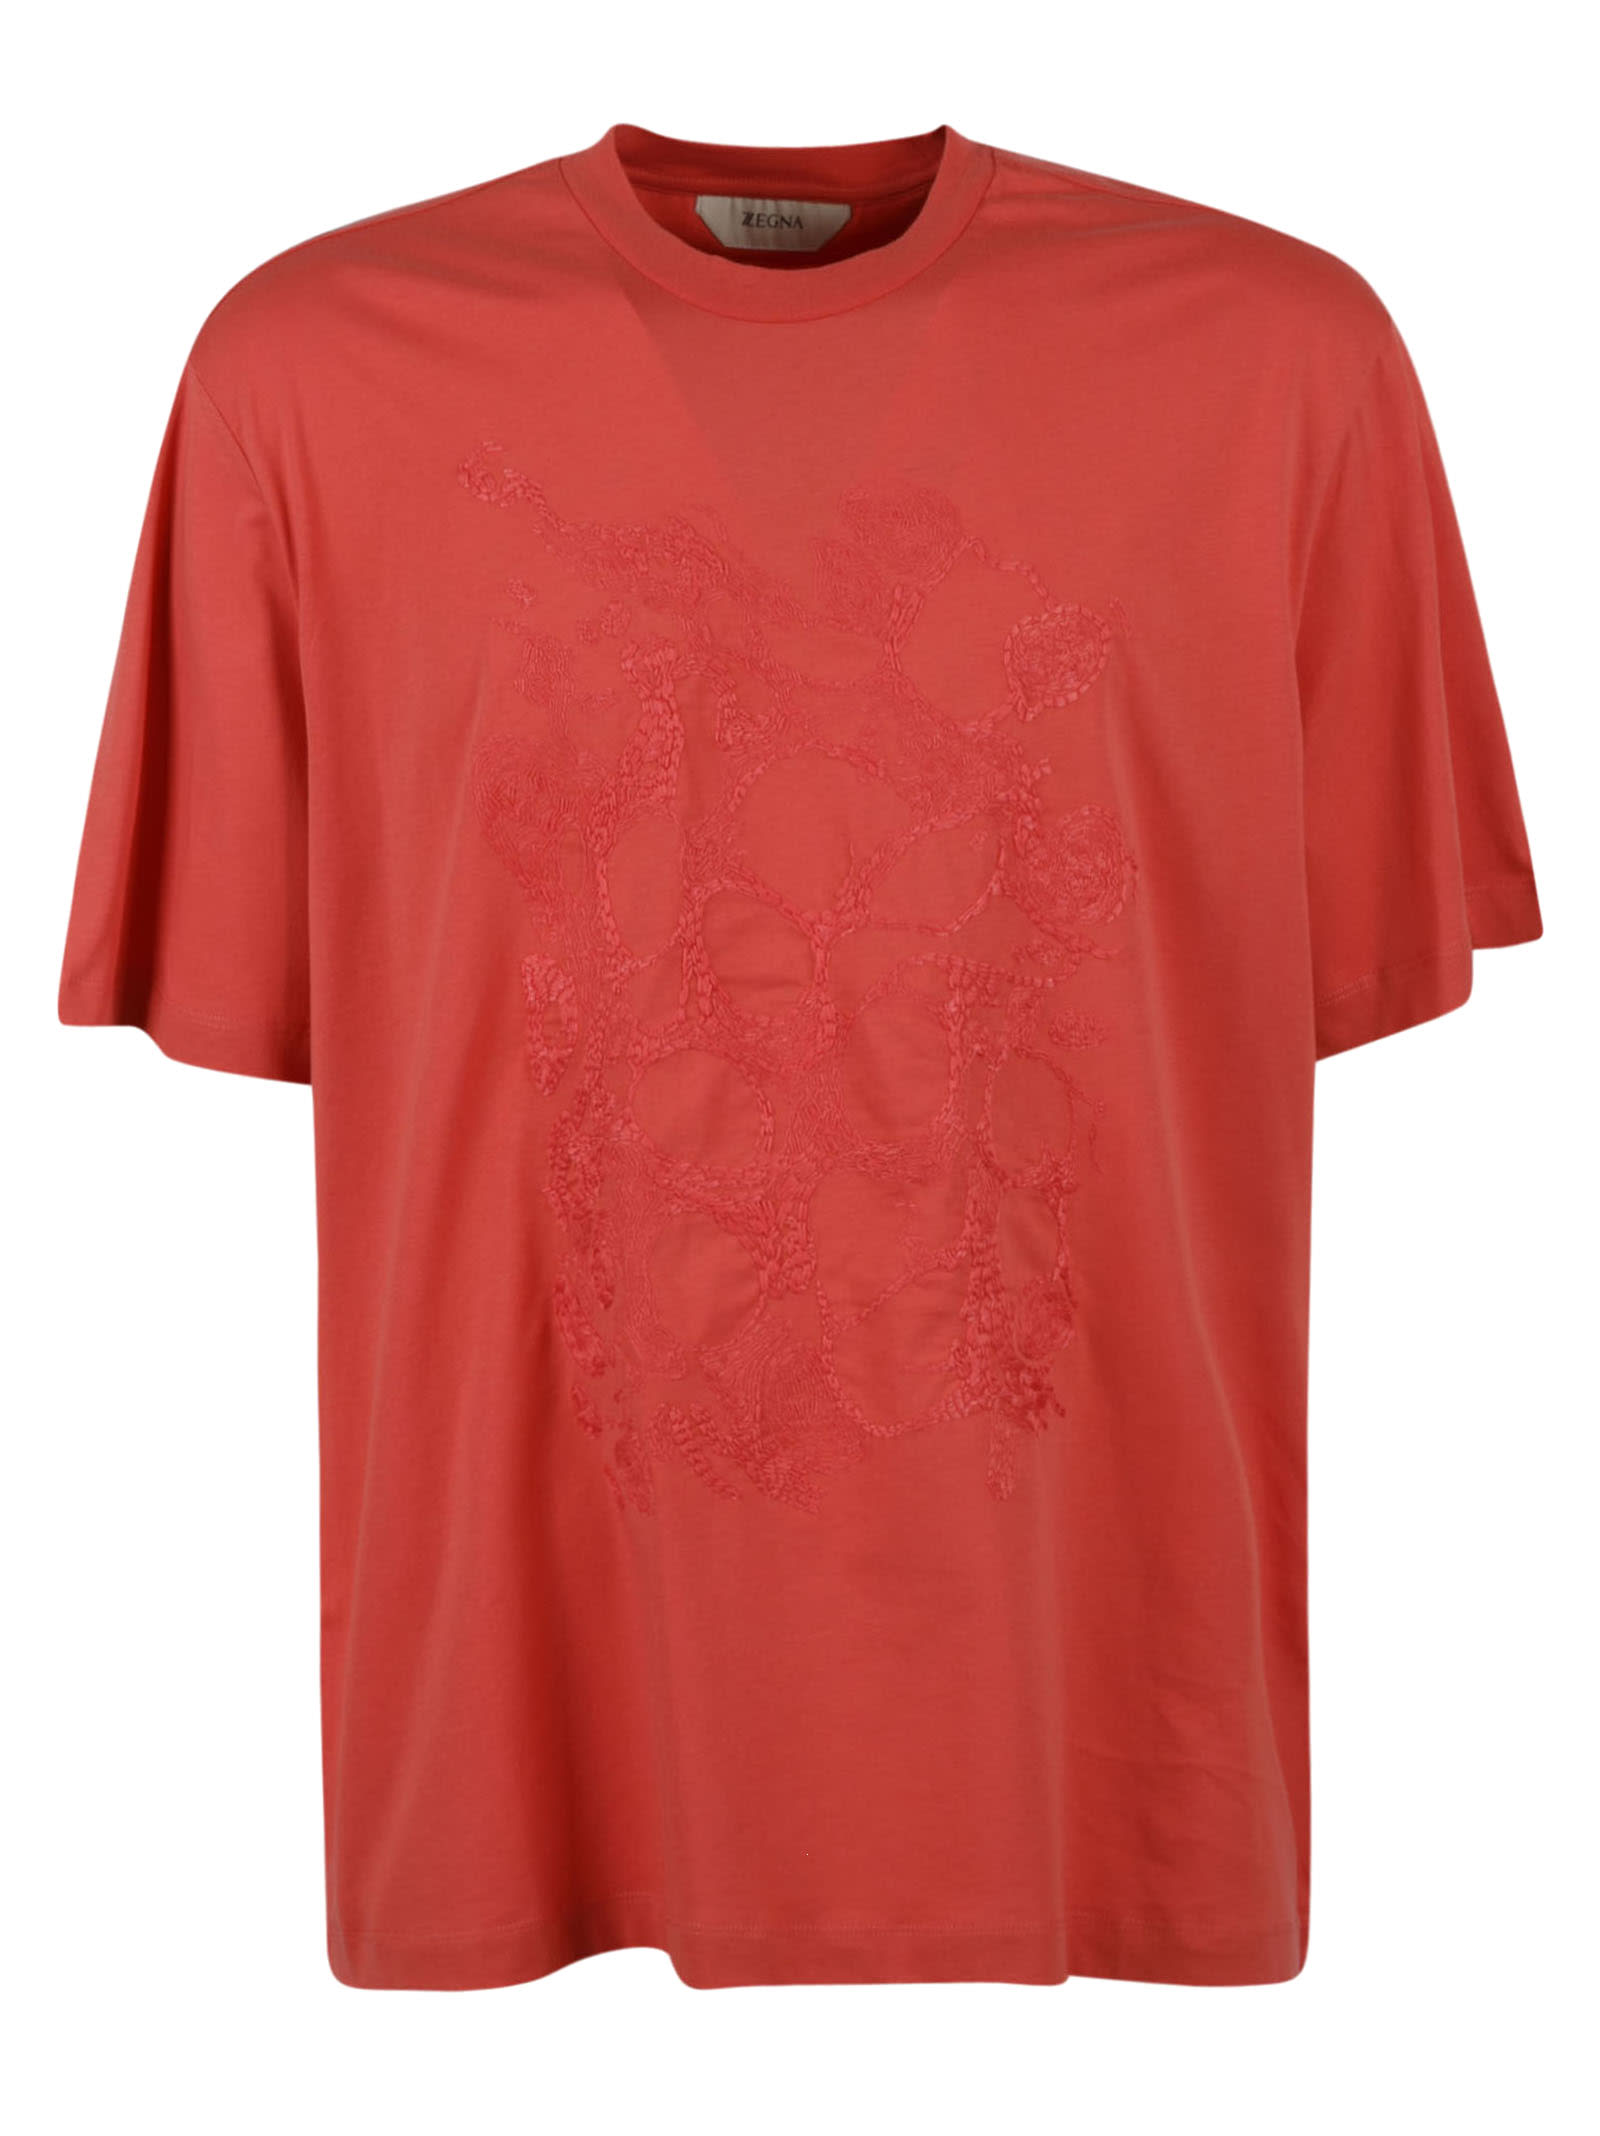 Z Zegna Embroidered T-shirt